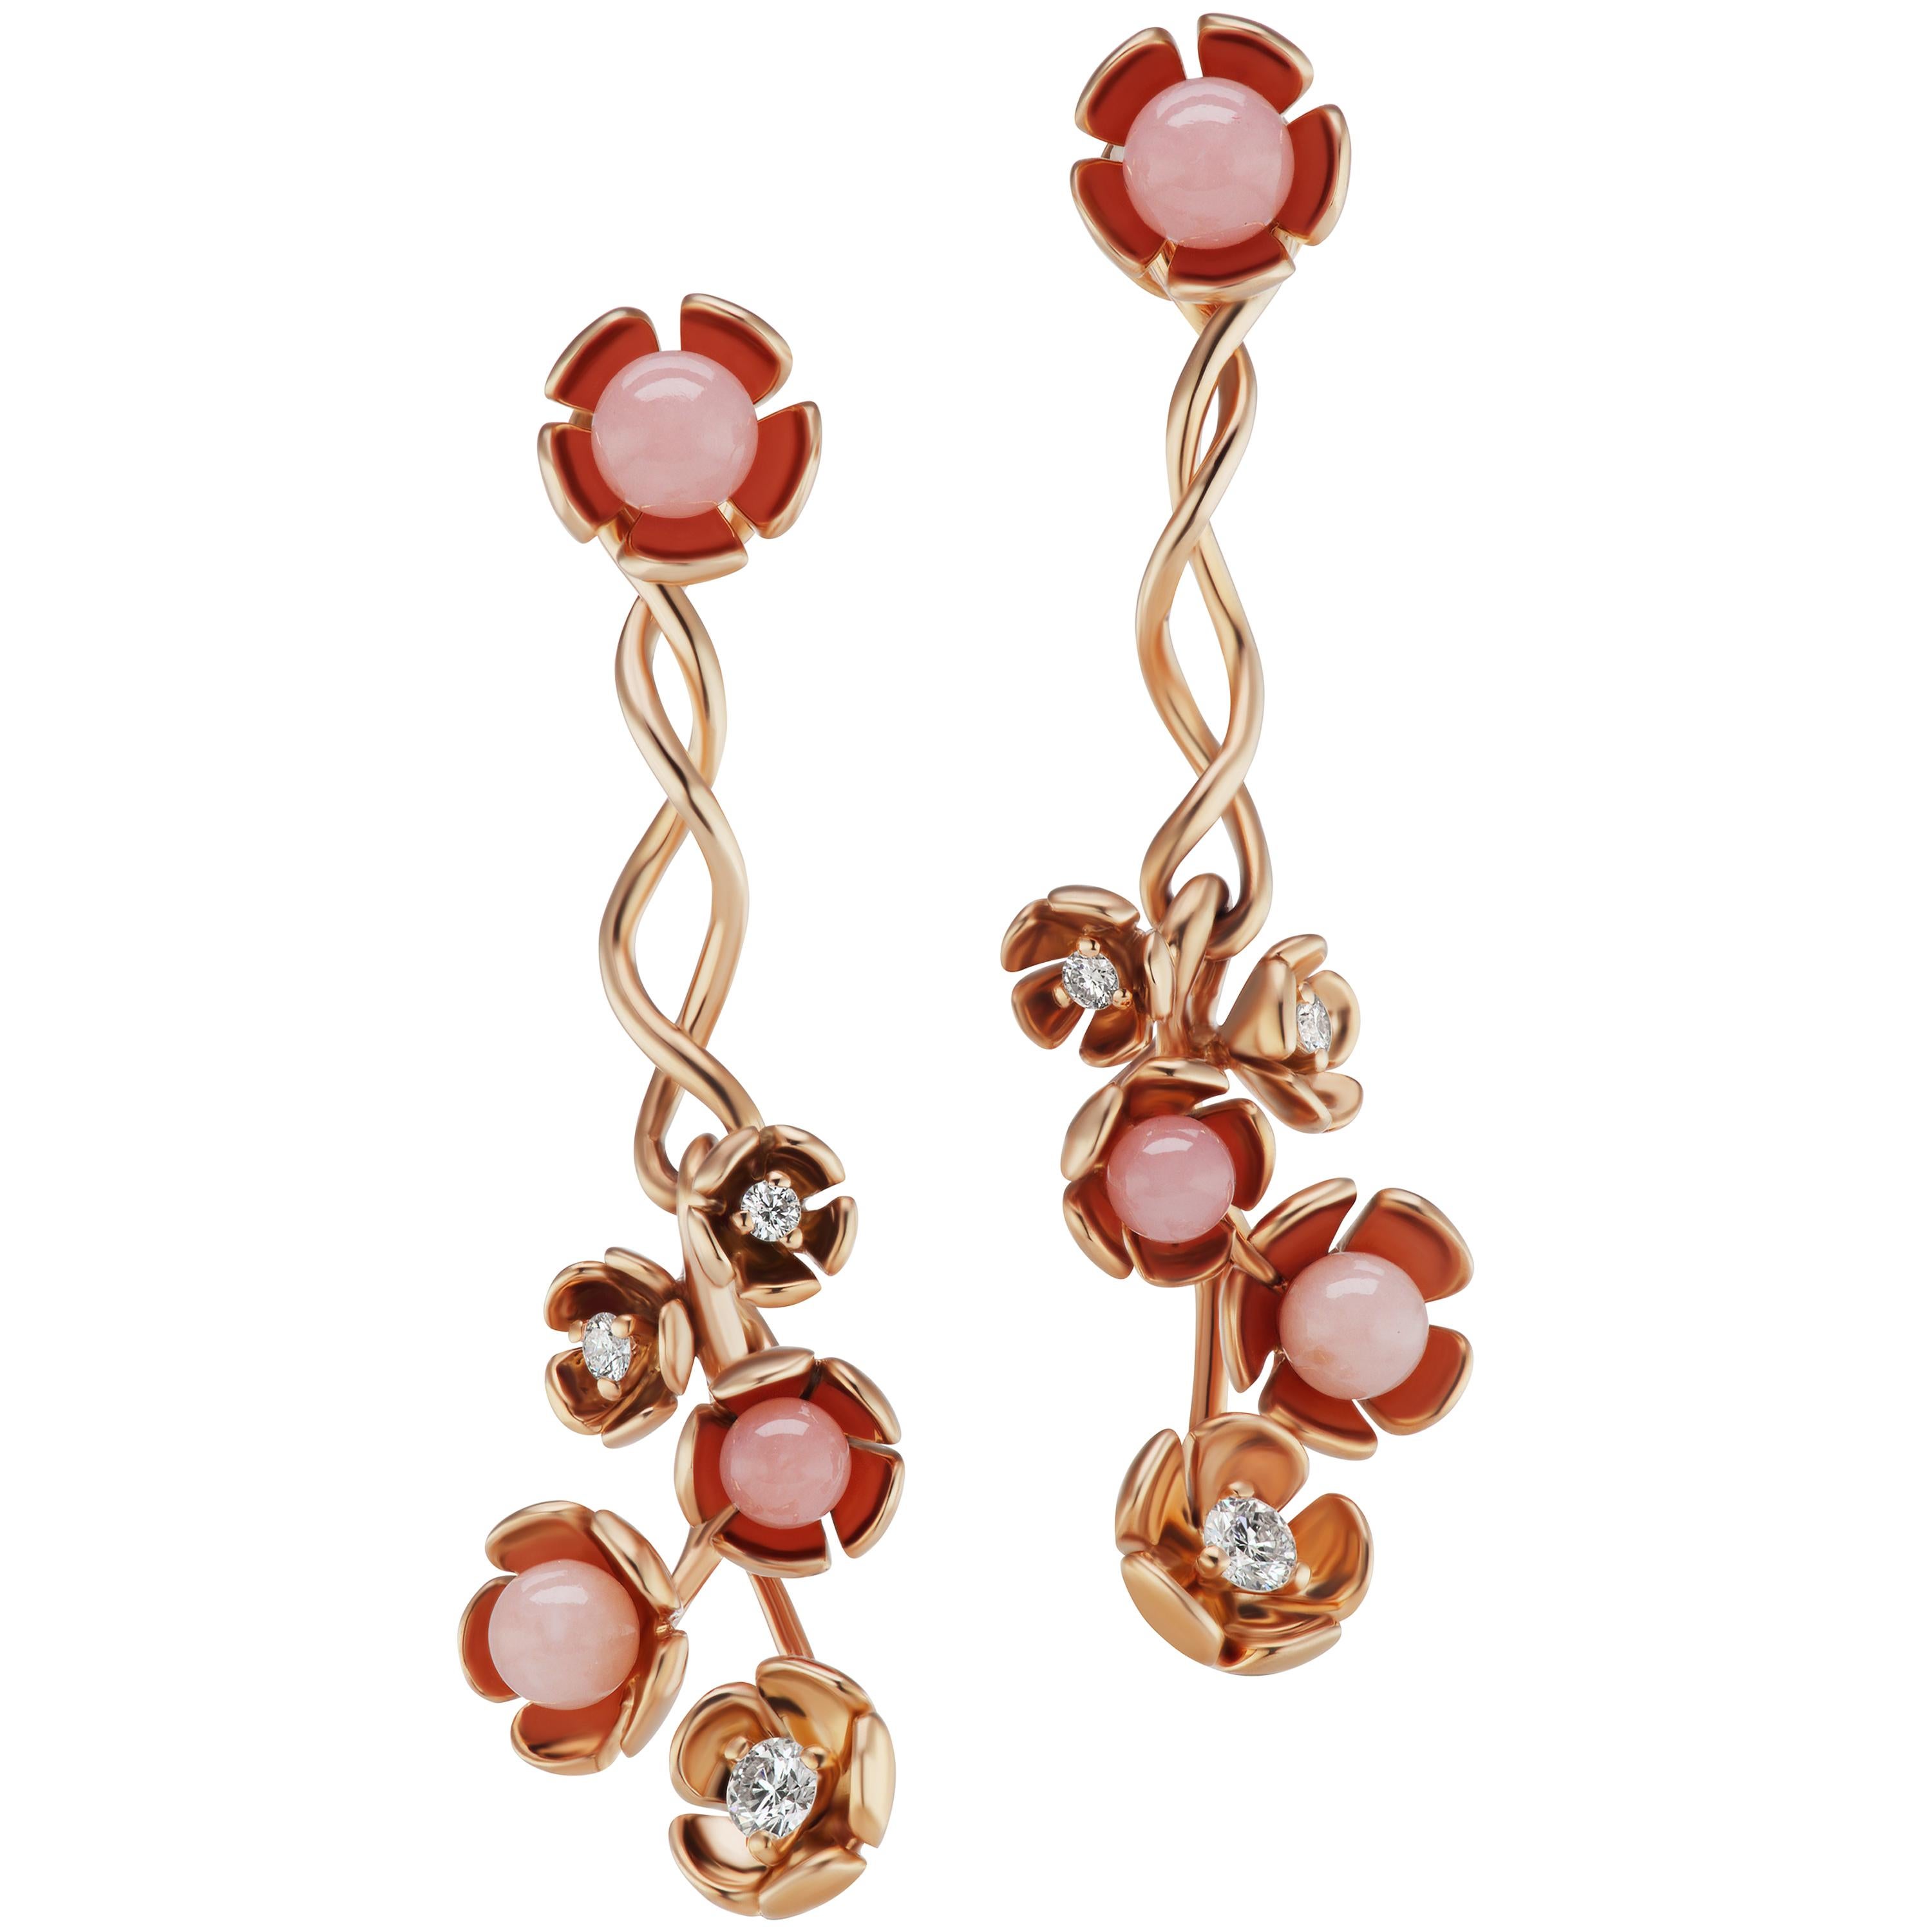 18 Karat Rose Gold Vine Earrings with Enamel and Pink Opal Flowers For Sale